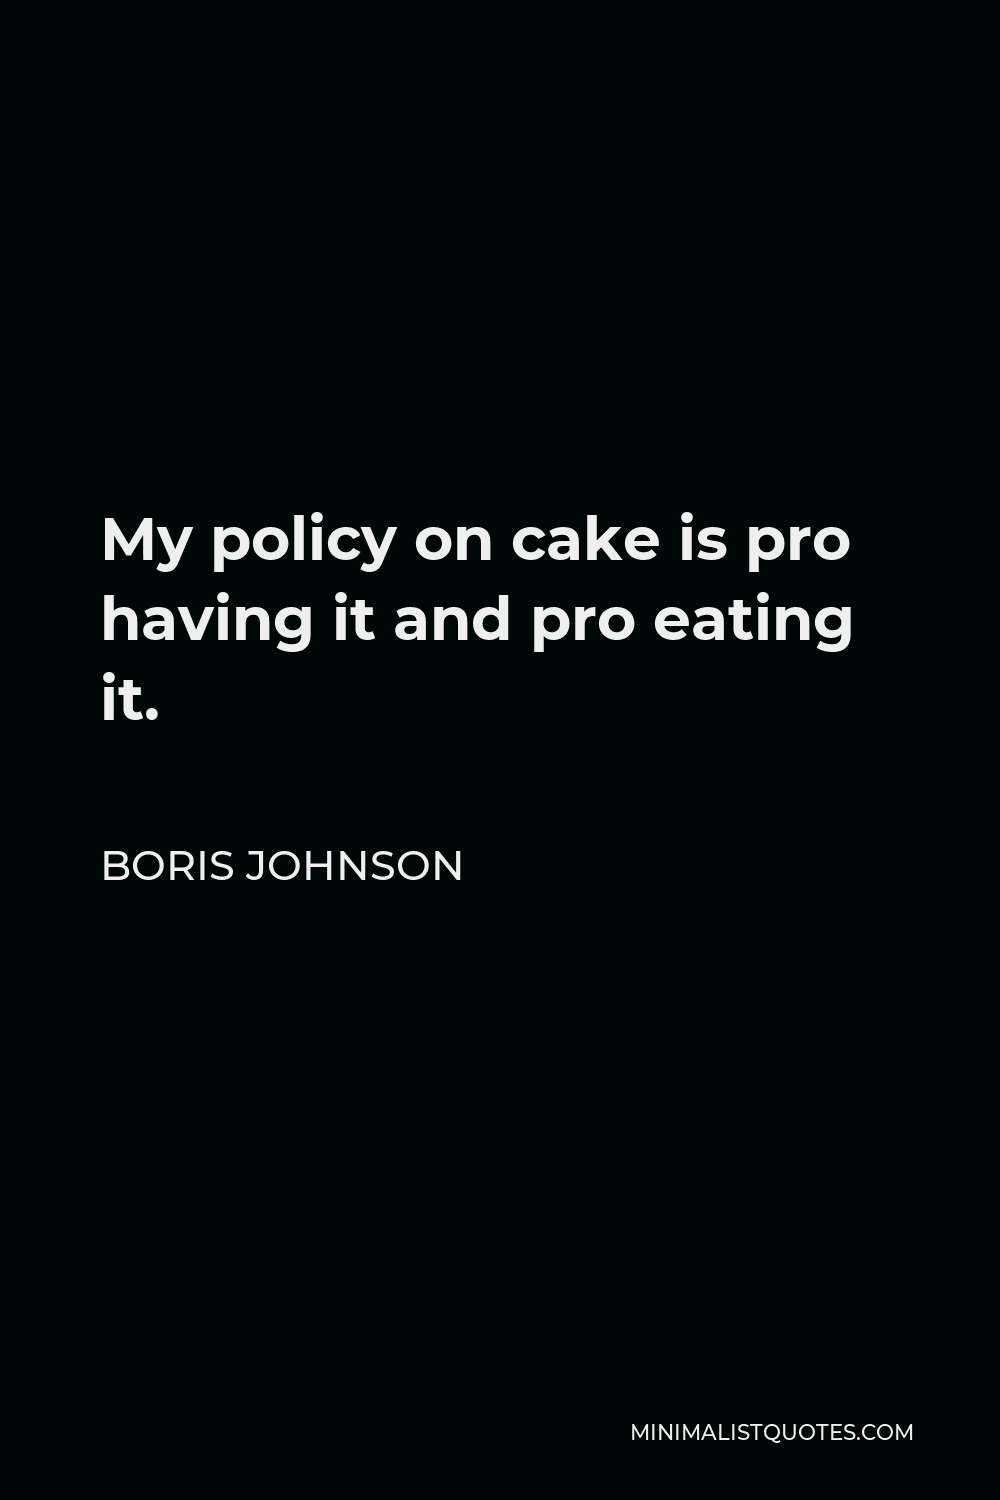 Boris Johnson Quote - My policy on cake is pro having it and pro eating it.